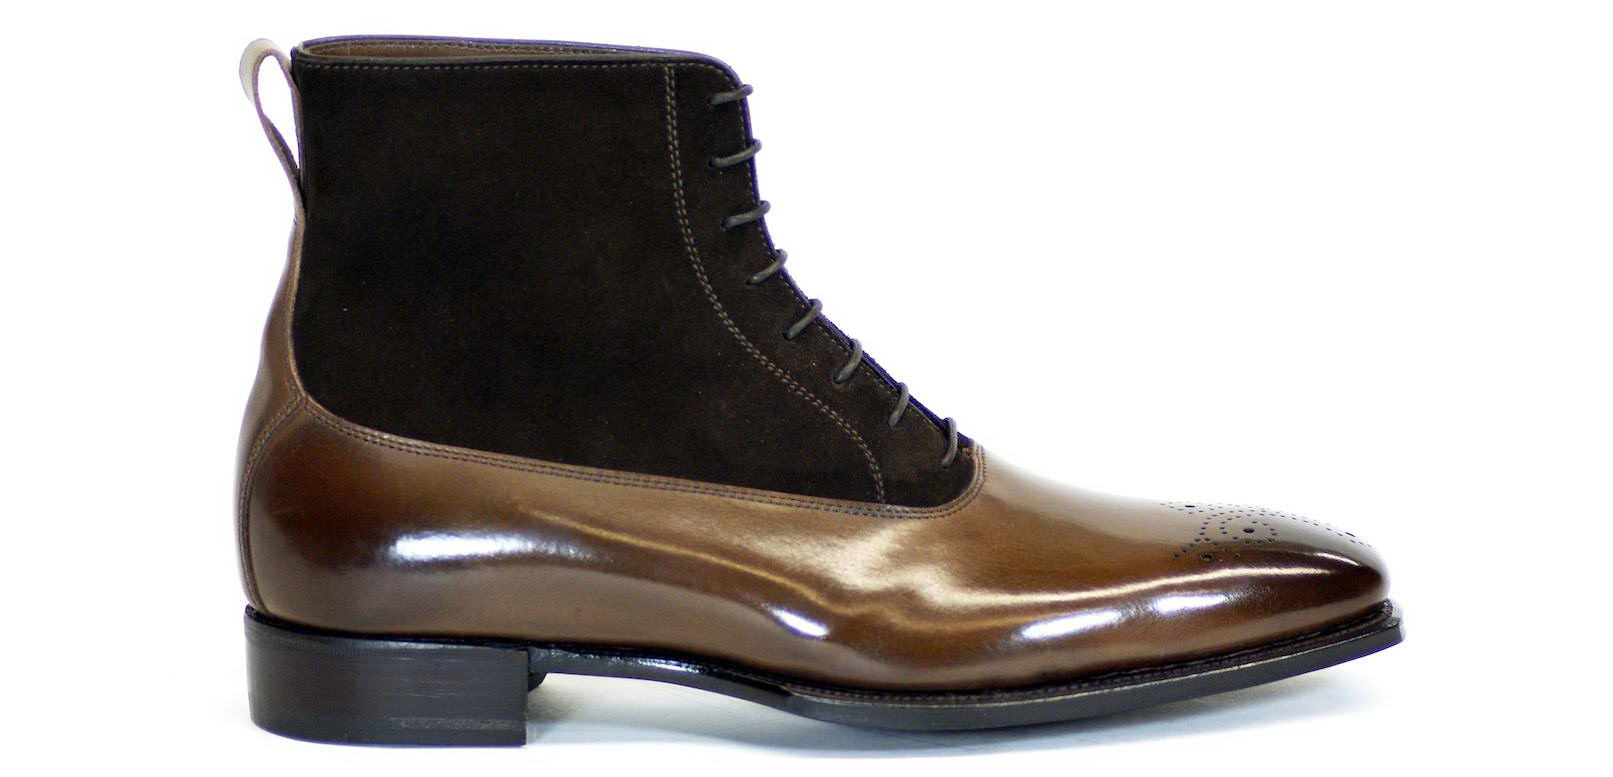 alfred-sargent-balmoral-boots-in-brown